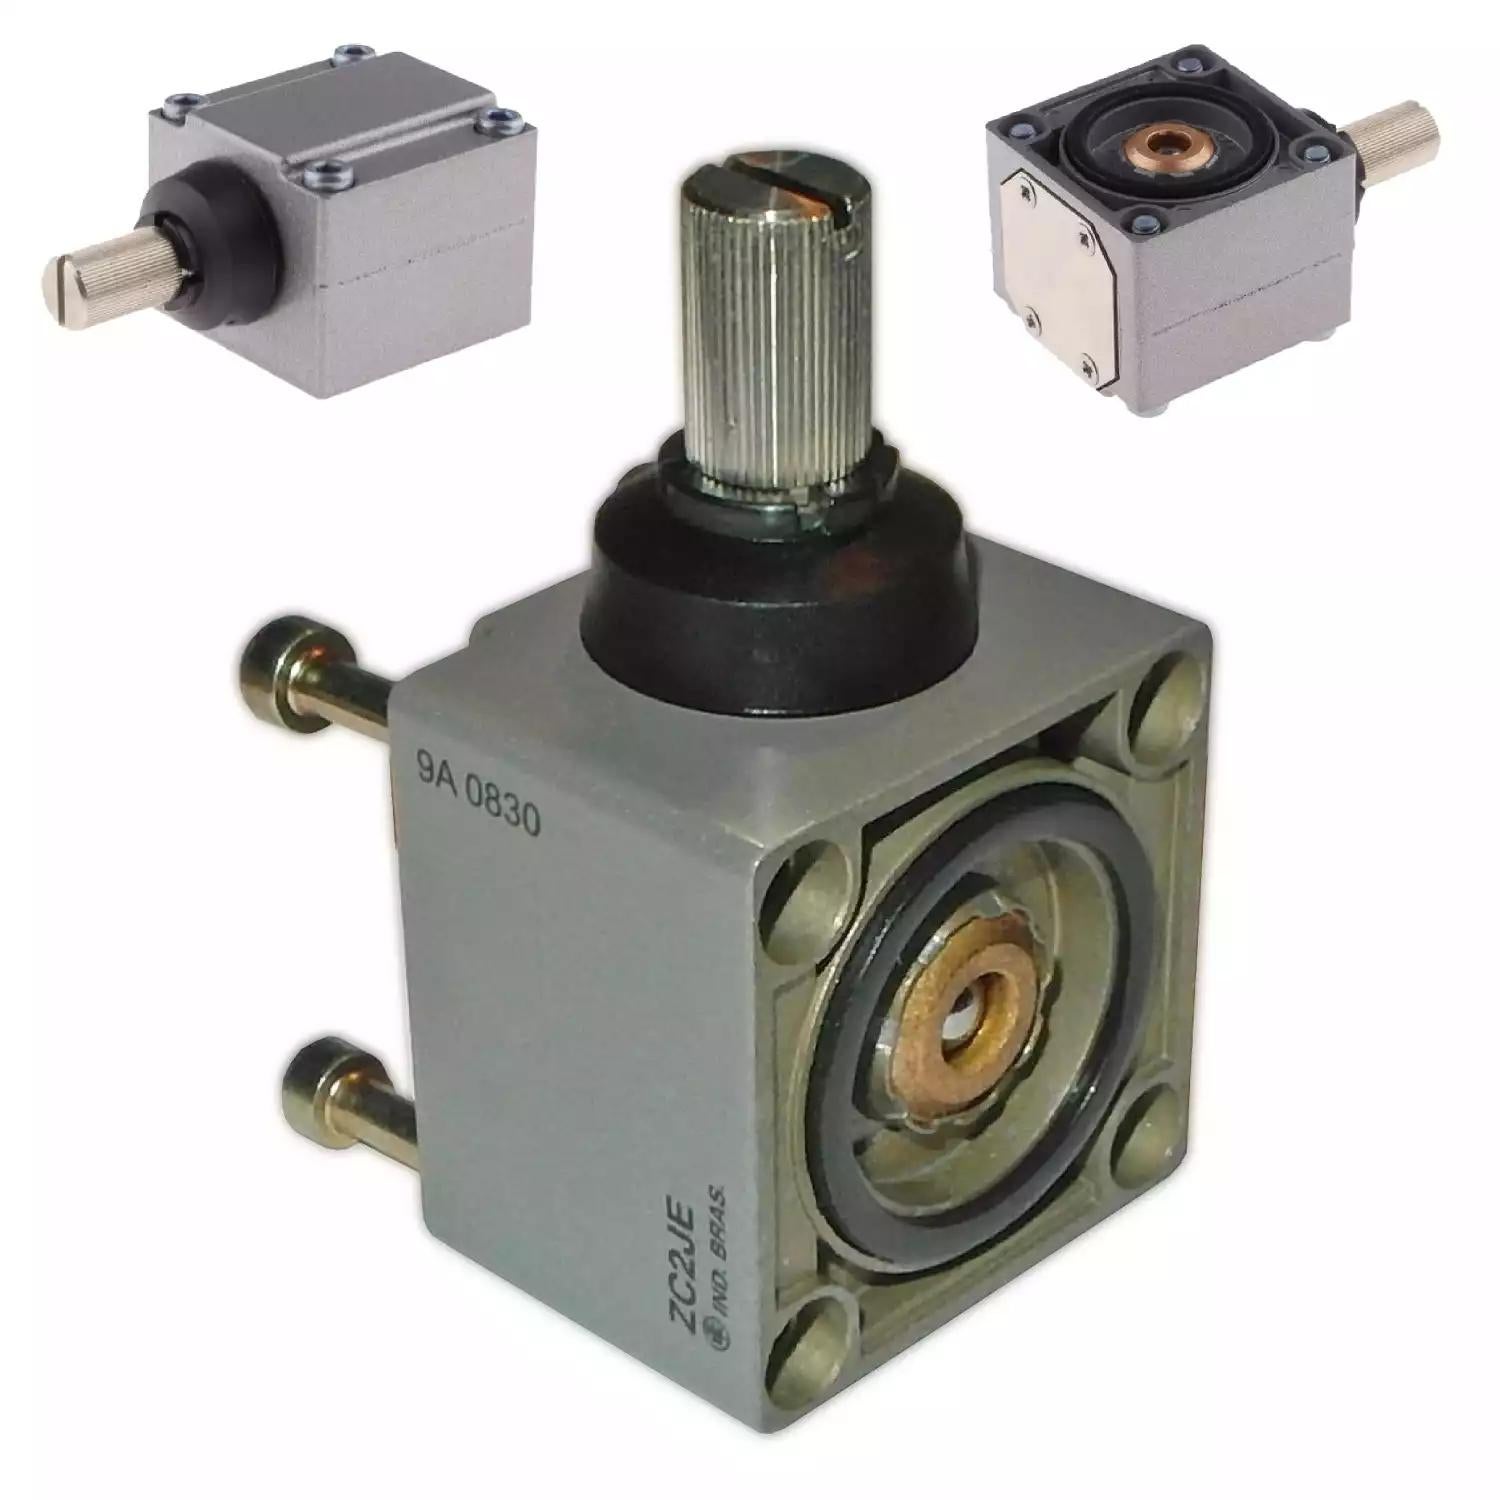 Limit switch head, Limit switches XC Standard, ZC2J, without lever spring return left and right actuation